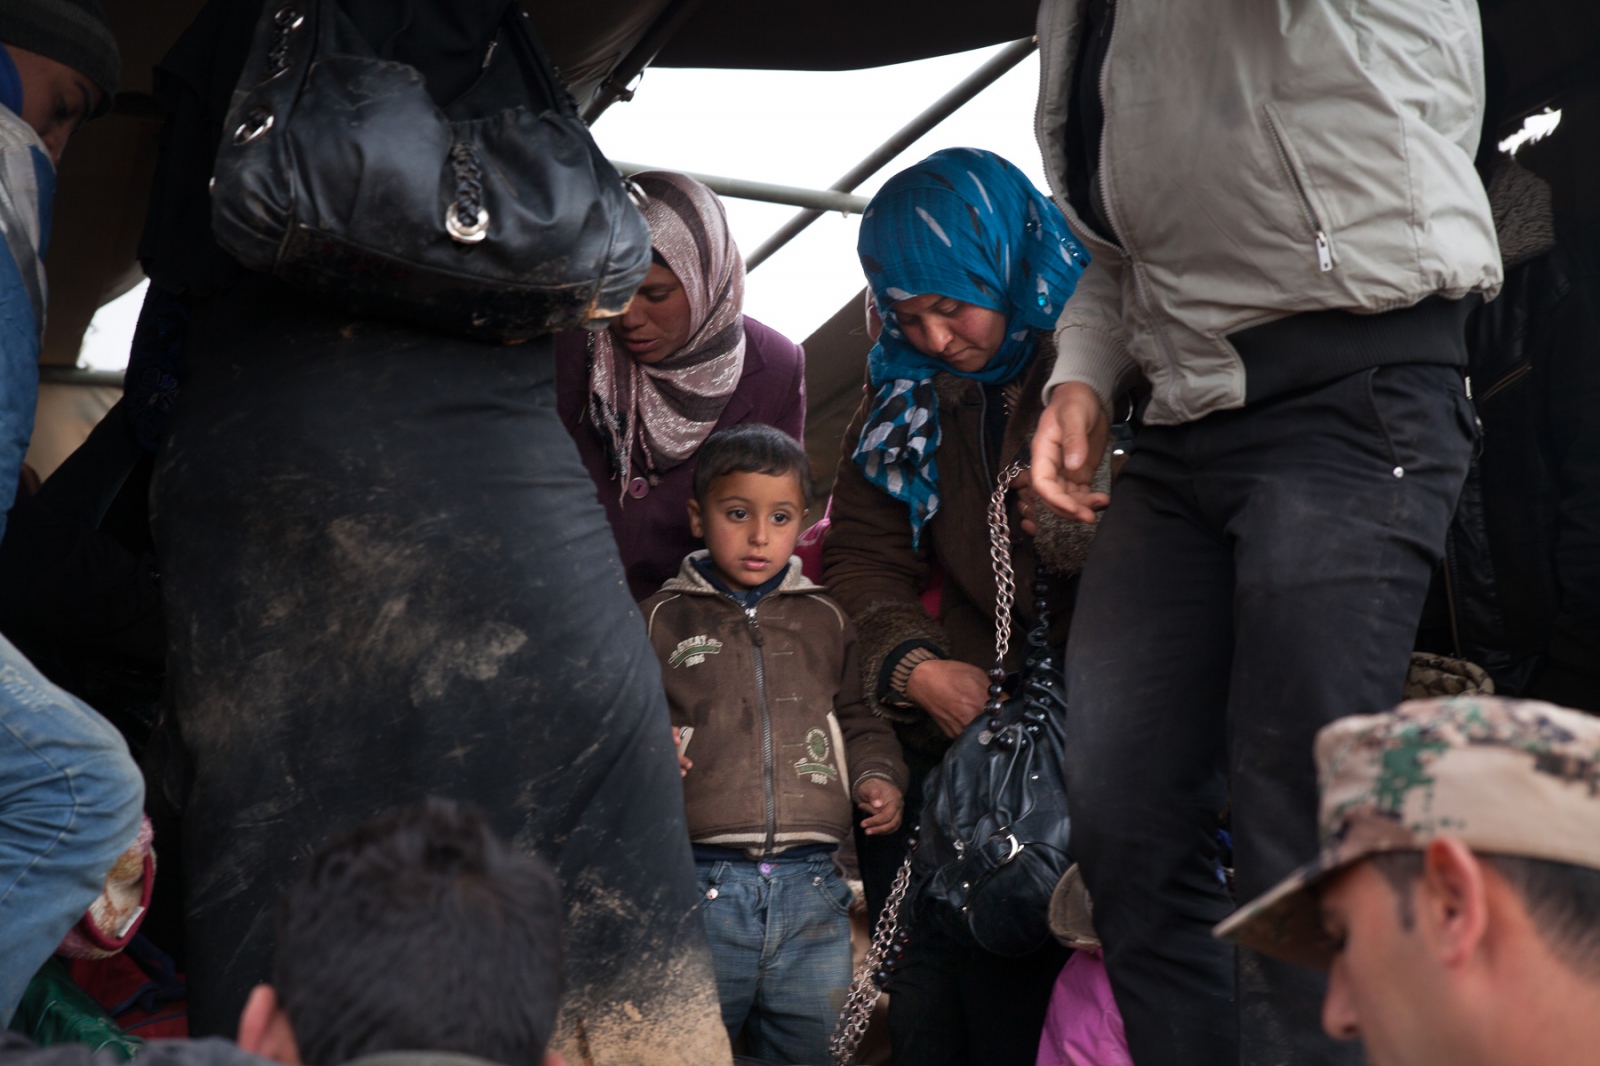 The Syrian Refugee Crisis - Many refugees have no idea where they will go next.